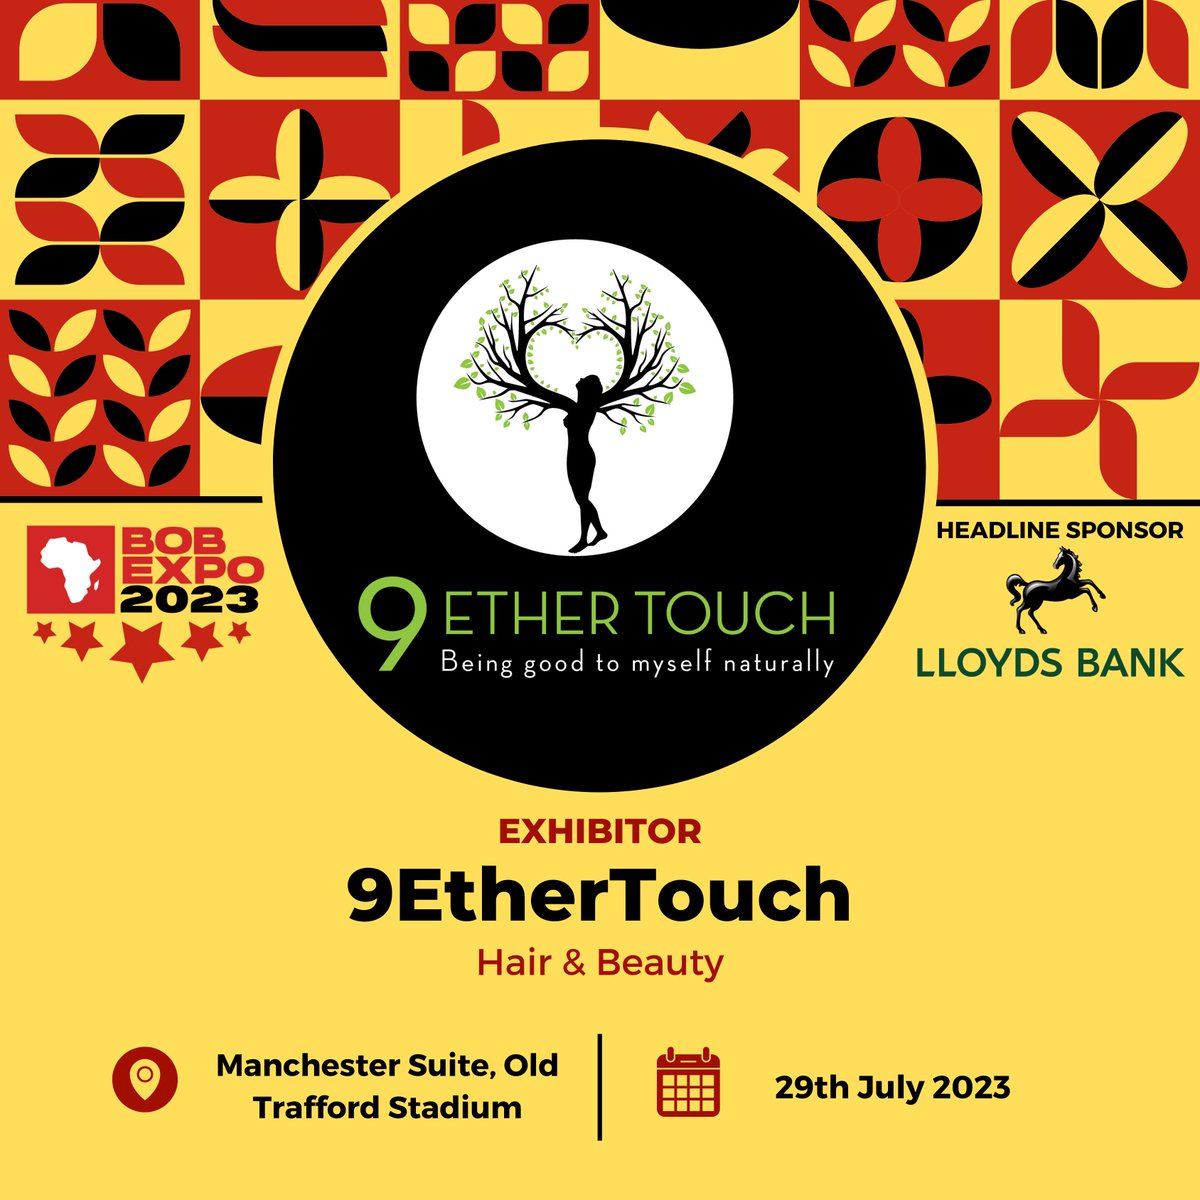 9EtherTouch at @BOBExpo2
2023 | 29 July 2023 #BOBExpo2023 #Bobexpo #blackbusiness #black #African #9EtherTouch #MeTime #NaturalProducts #manchester #summer #trending #explore #foryou #shopping #BuyBlack #Selfcare #Handmade #HealthySkin #Skin #Body #BeingGoodToMe #MadeWithLove